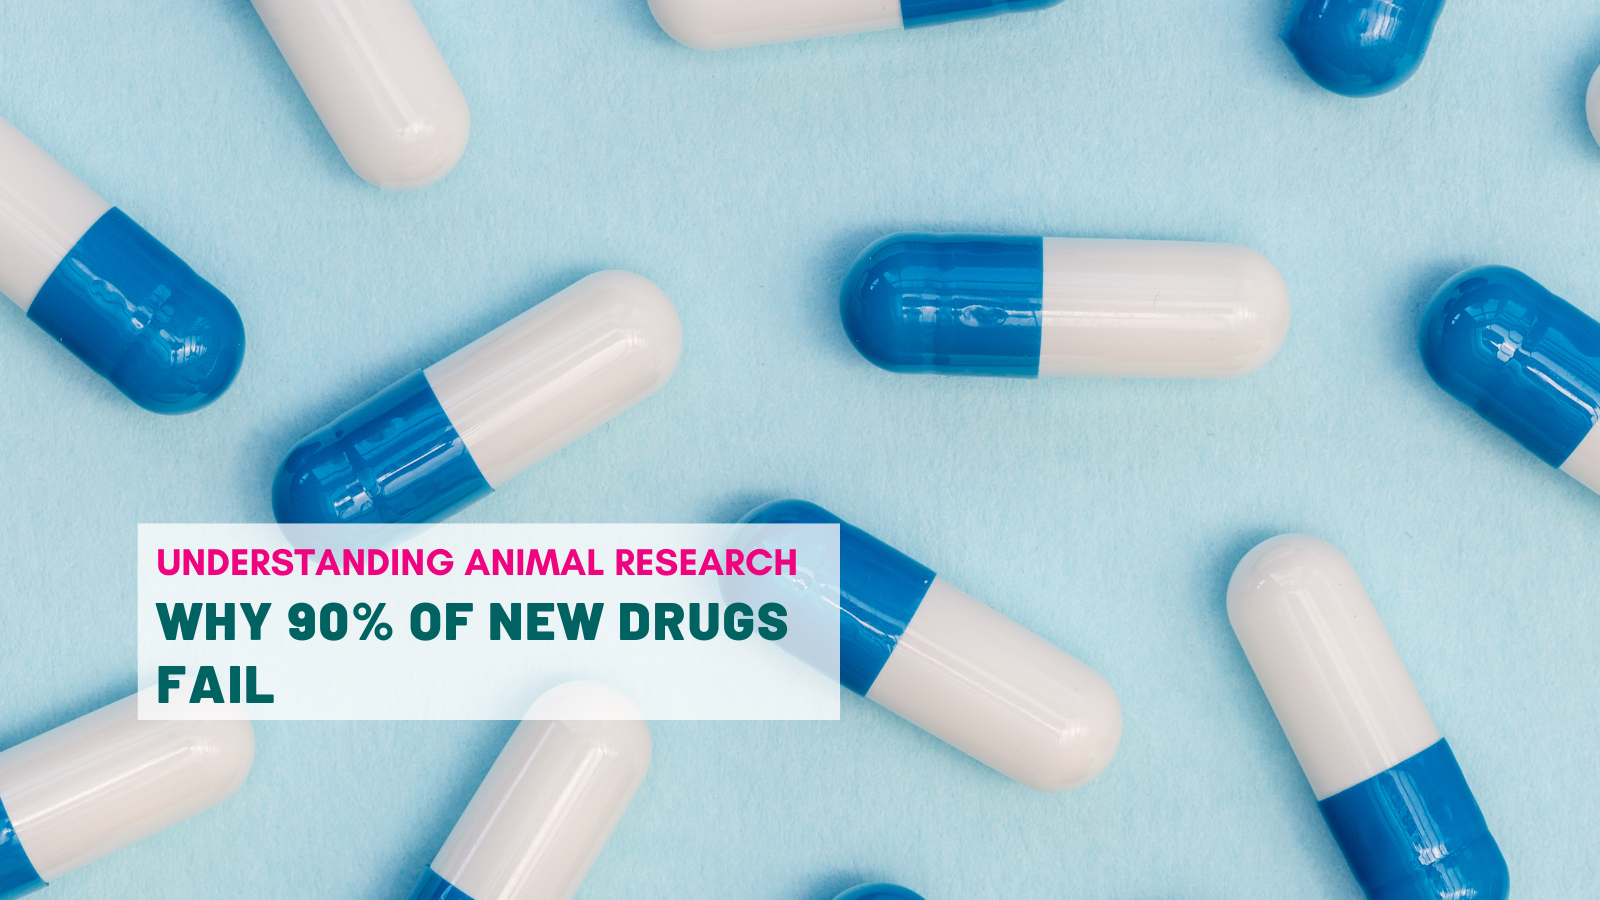 Why do 90% of new drugs fail?